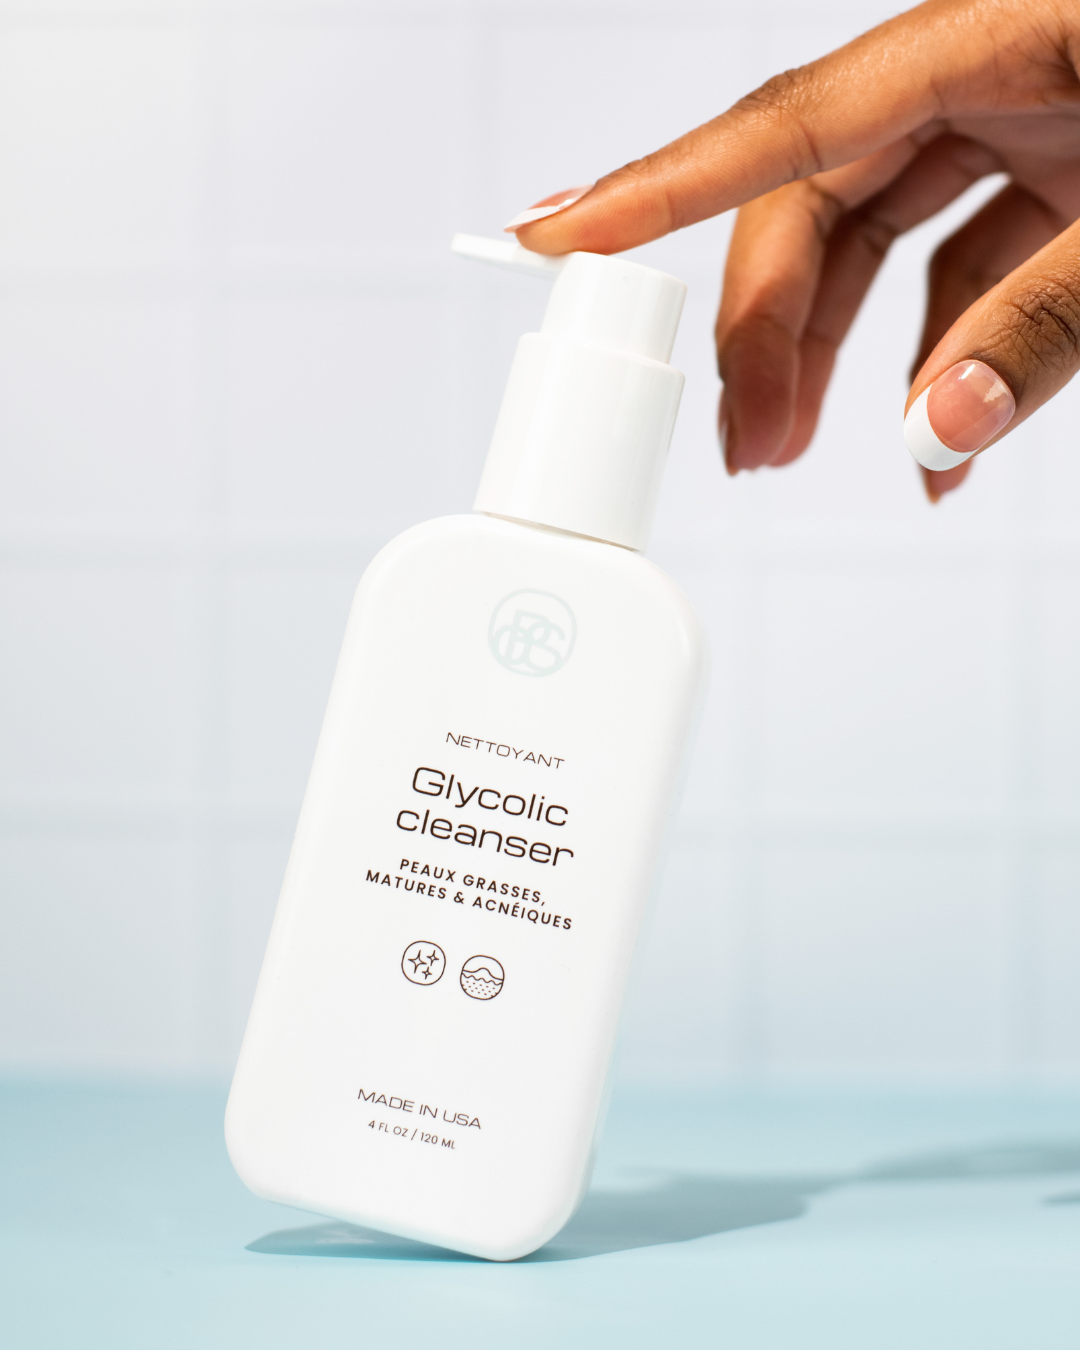 Glycolic cleanser